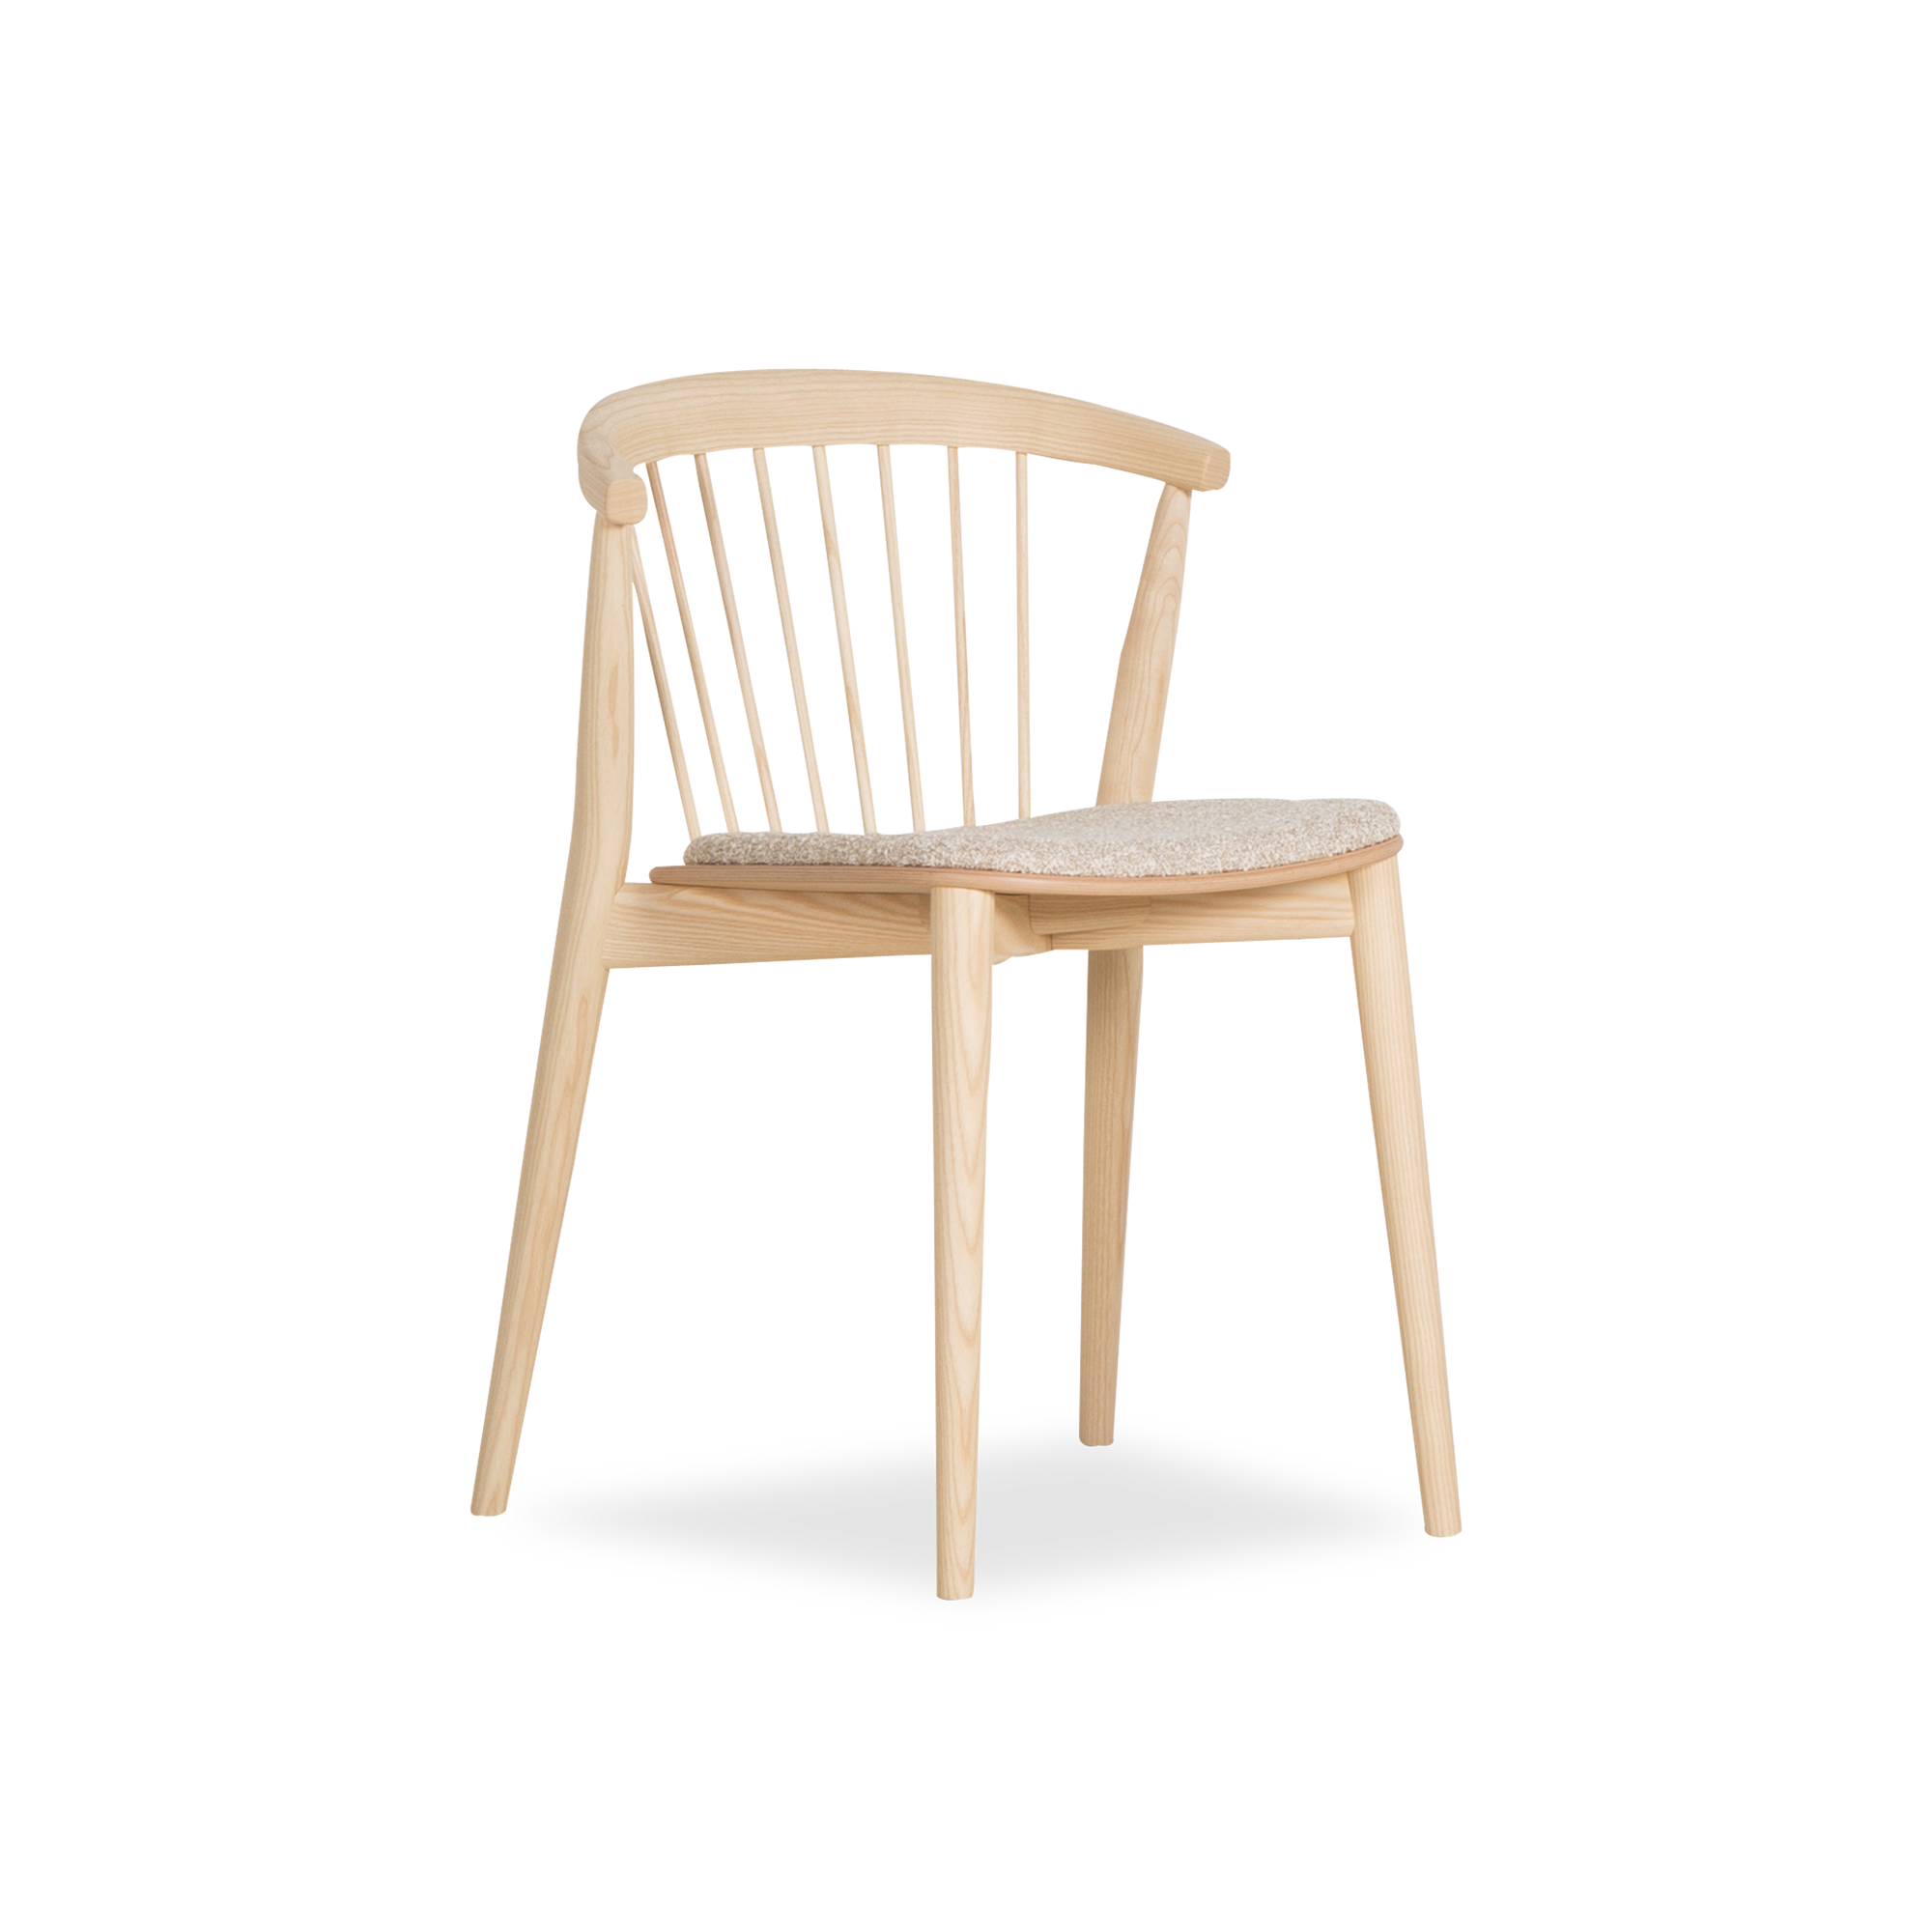 The Newood chair represents a contemporary reinterpretation of the timeless charm found in Windsor-style chairs.